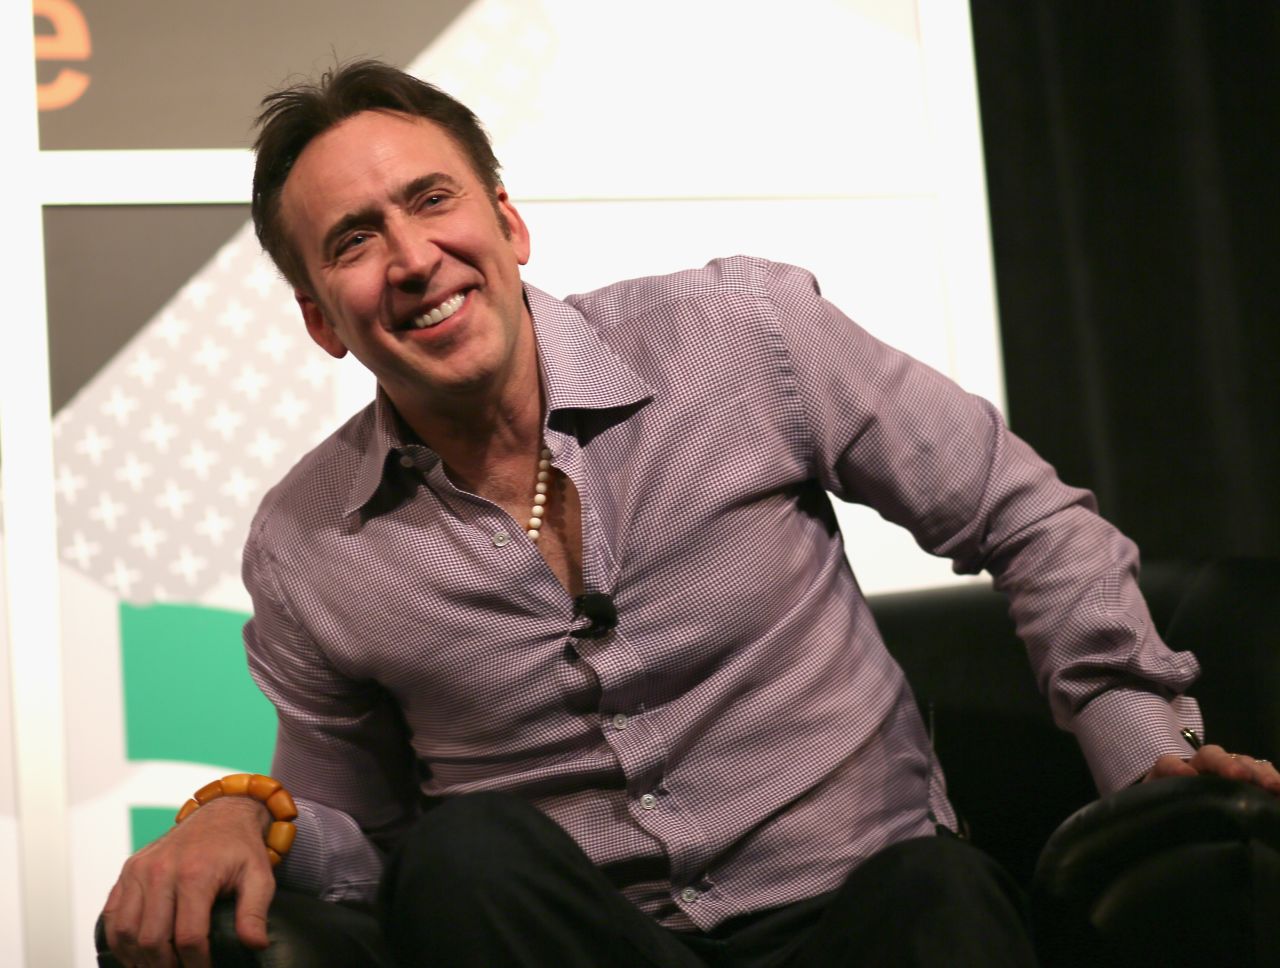 Fans of "Peggy Sue Got Married" and "Moonstruck" may find it hard to believe, but Nicolas Cage turned 50 in January.